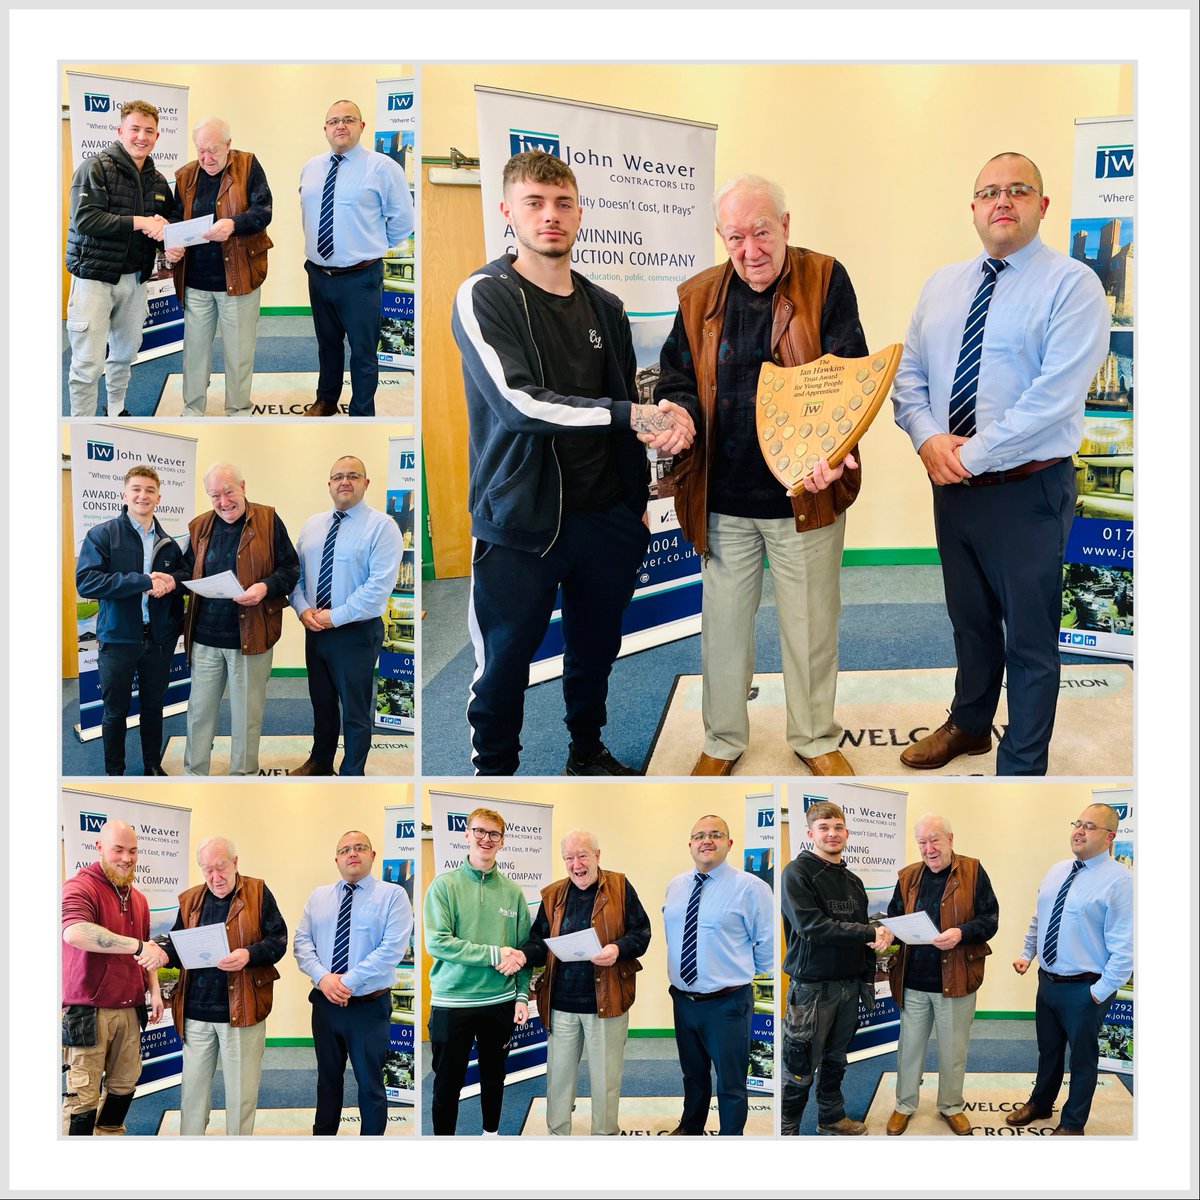 Our annual apprentice awards have taken place. Overall winner goes to carpentry apprentice Dwayne Vickers. Well done and congratulations to all 🏆#awards #construction @CITB_Wales #traininganddevelopment #loveconstruction